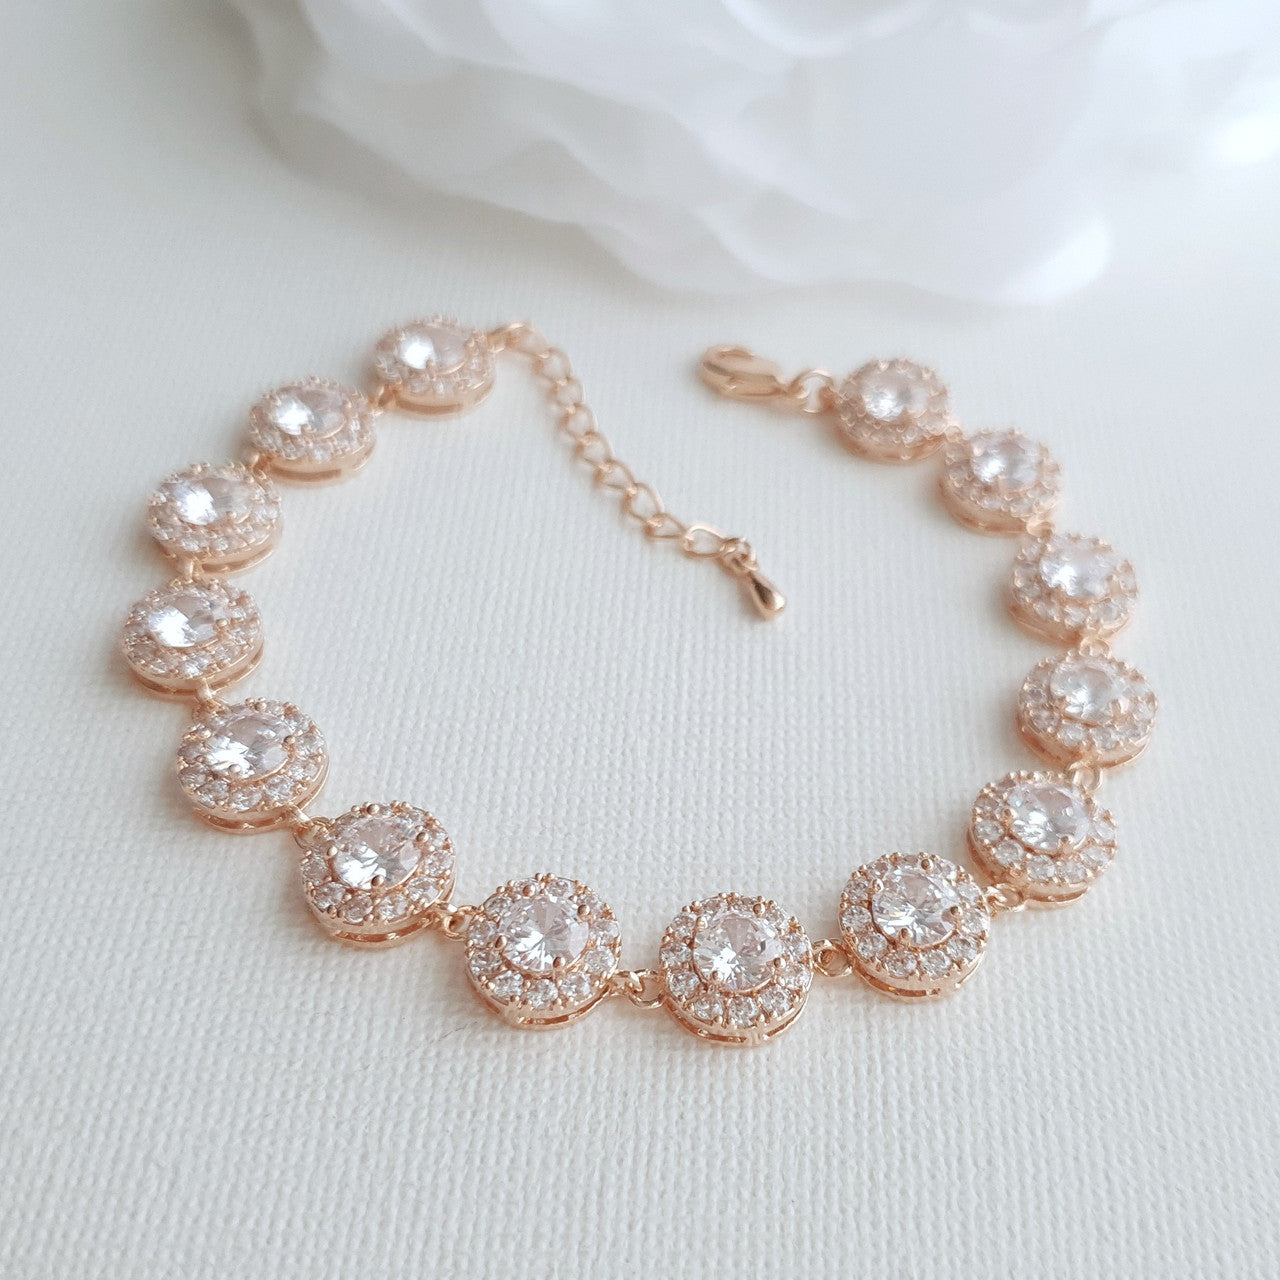 Gold Bridal Bracelet for Weddings in Round Cubic Zirconia -Cristle